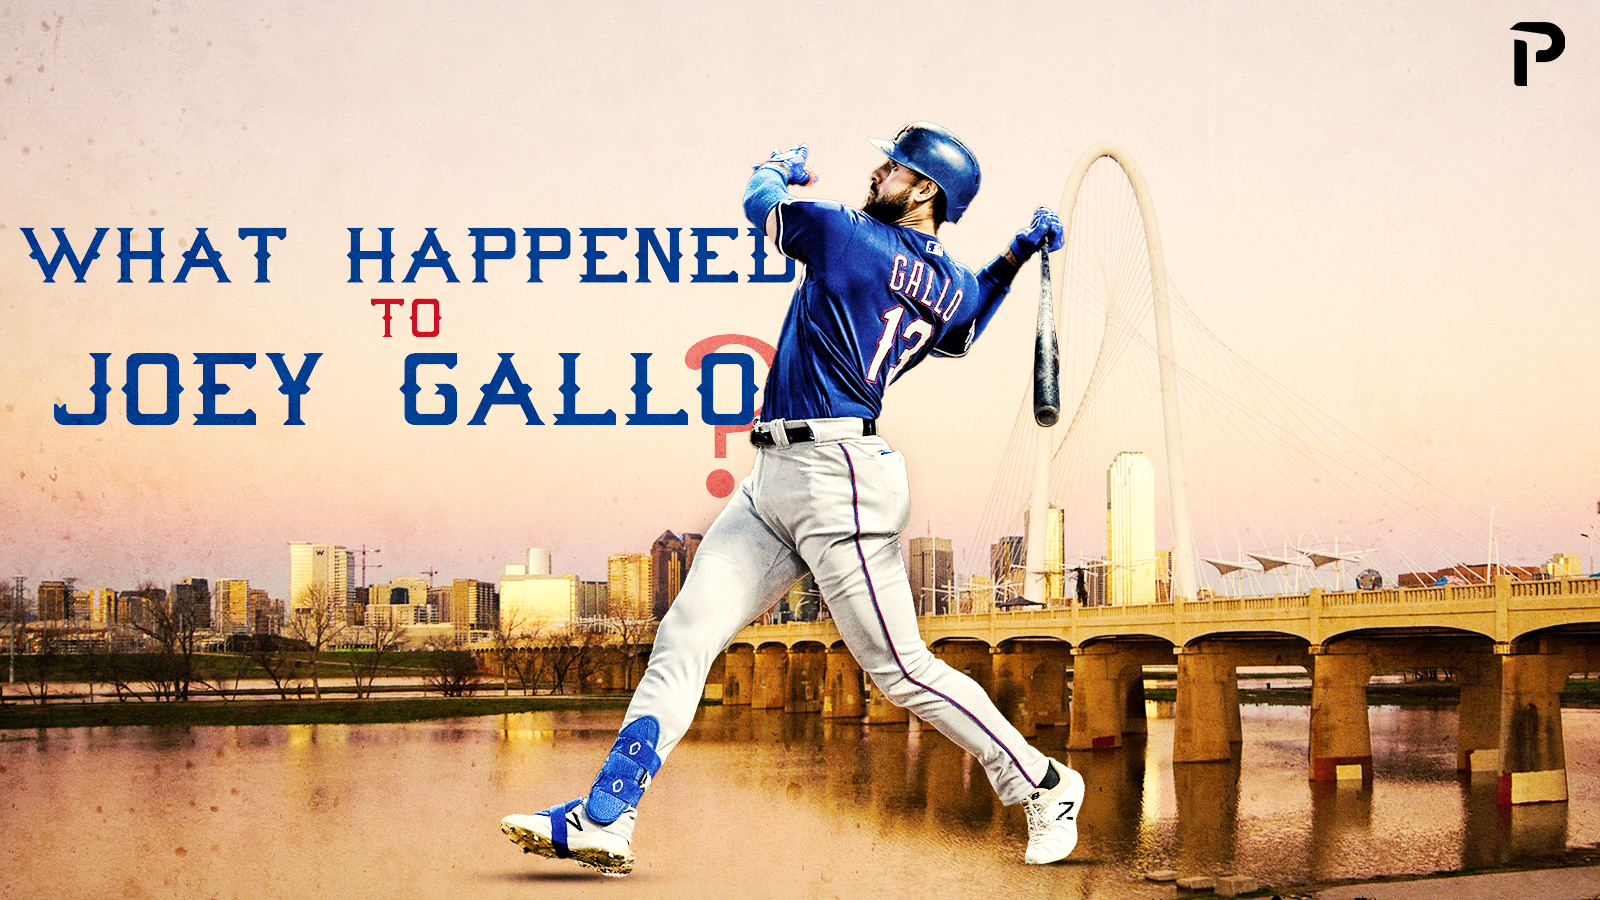 What Happened to Joey Gallo?